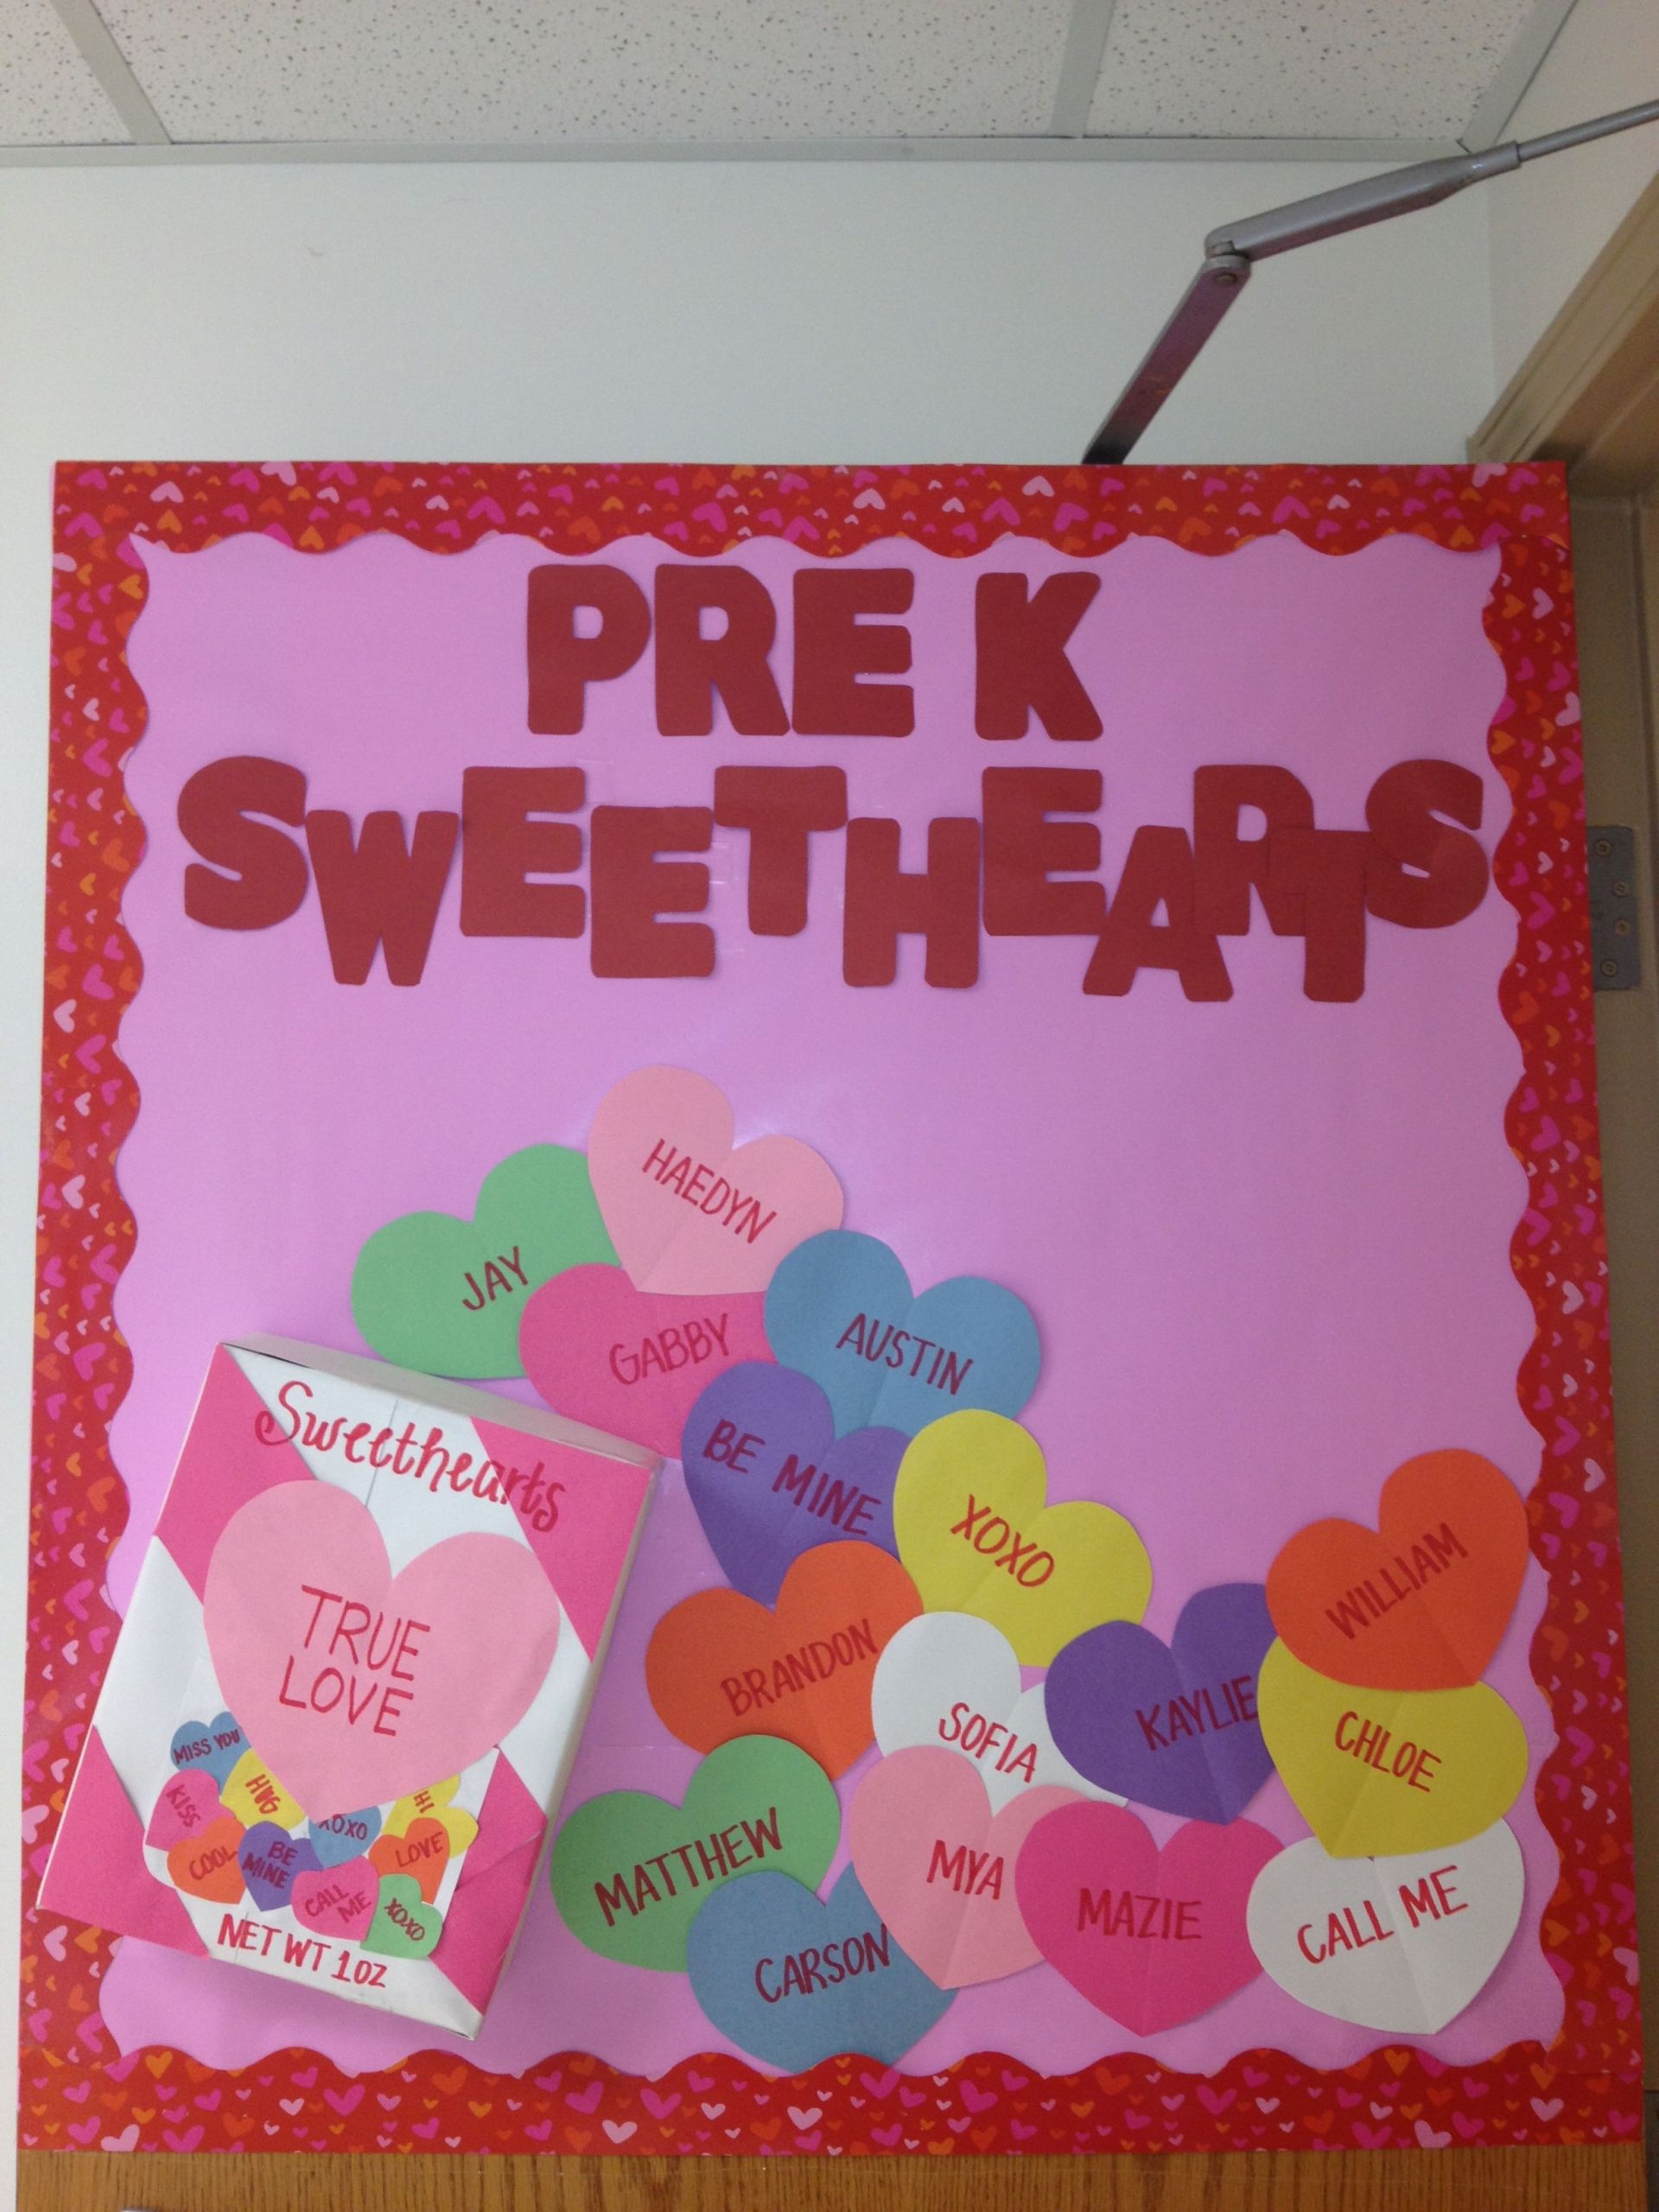 Valentines Day Bulletin Board Ideas For Preschool
 Valentines Day Bulletin Board Ideas